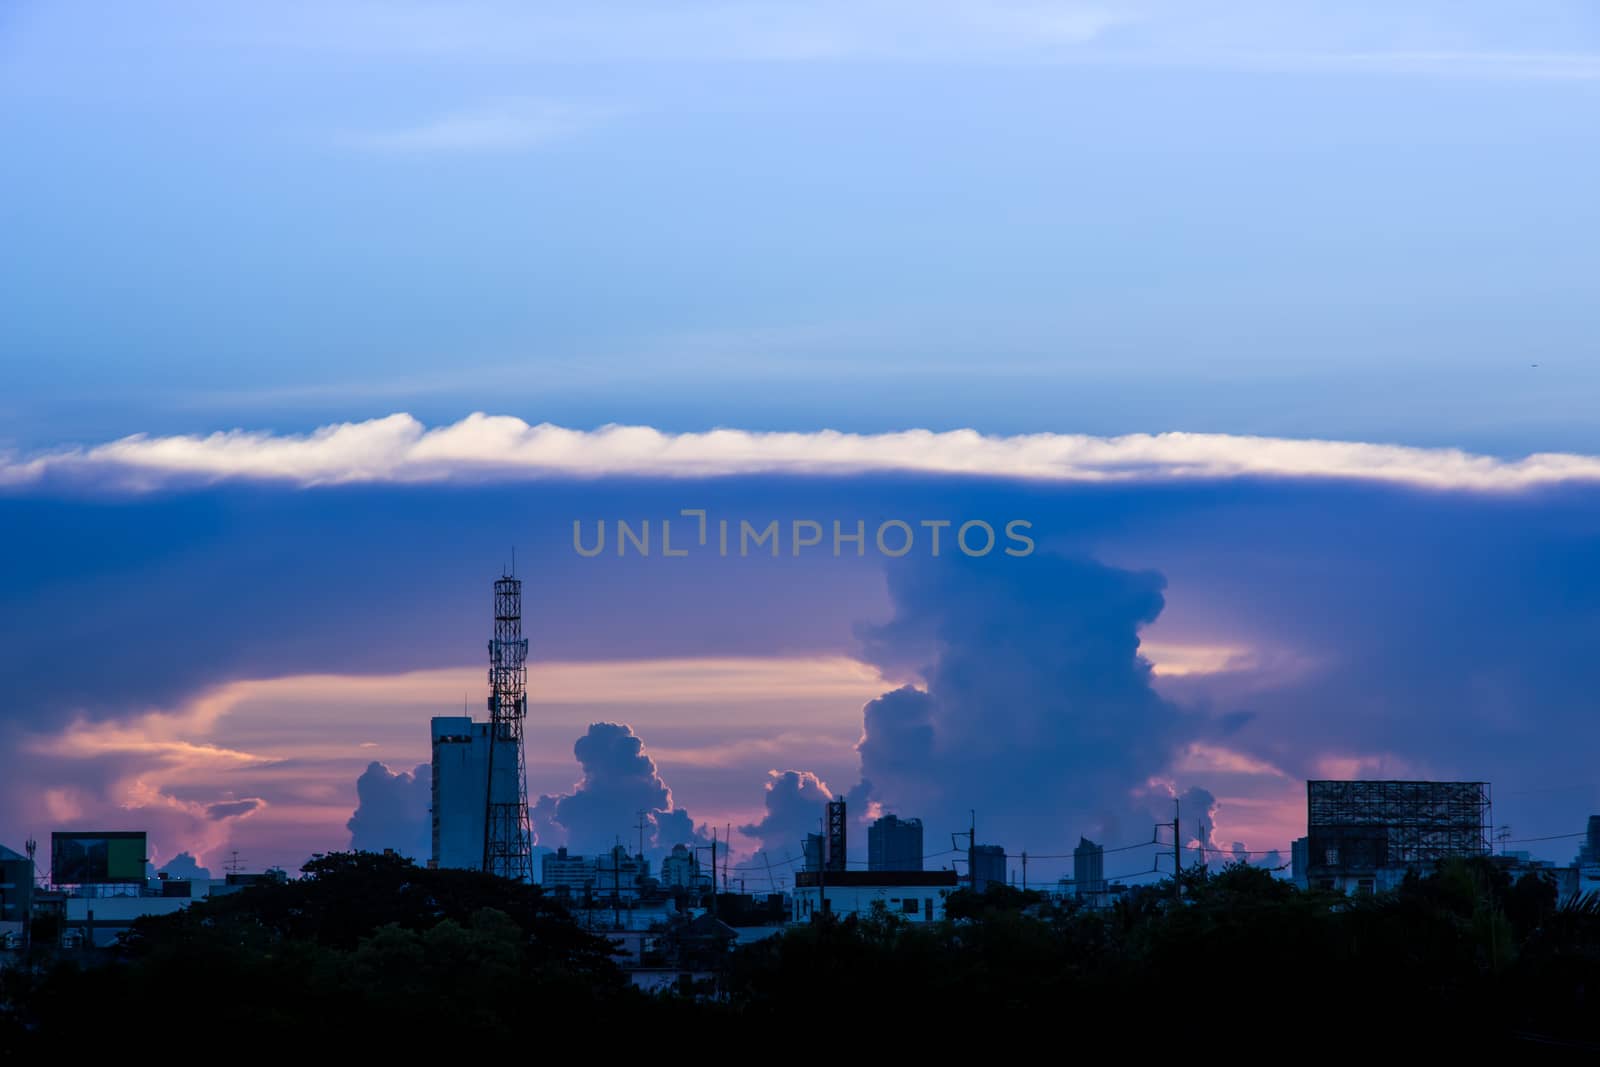 A sunset image with a cloud divides the line between the center of the image with the background as the building in the city.